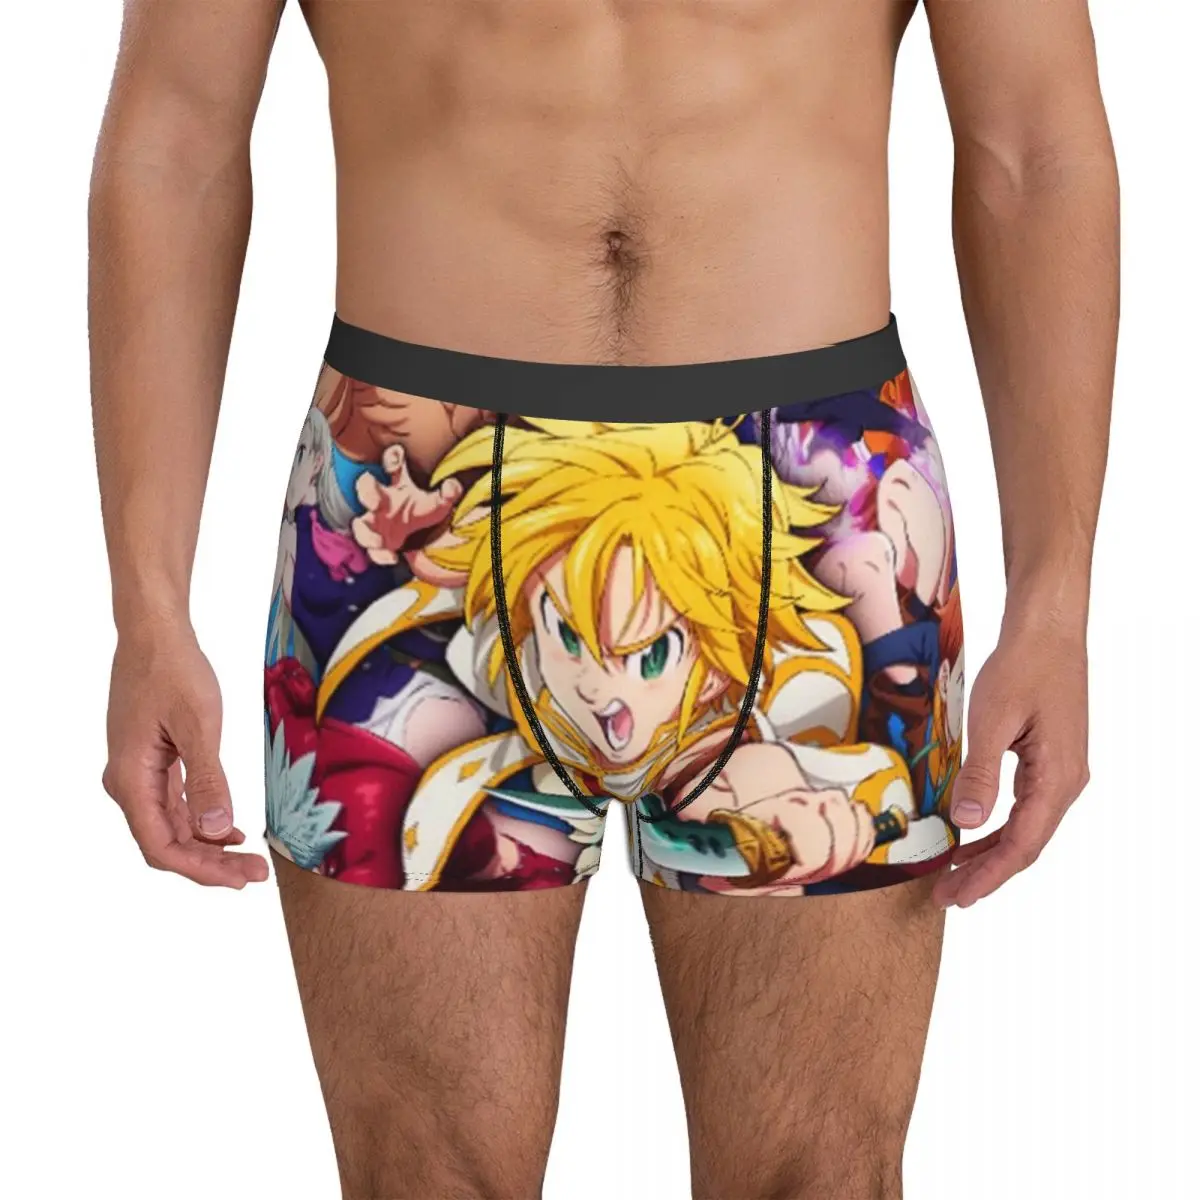 The Seven Deadly Sins Underwear Anime 3D Pouch High Quality Boxershorts Print Shorts Briefs Funny Man Panties Plus Size 2XL